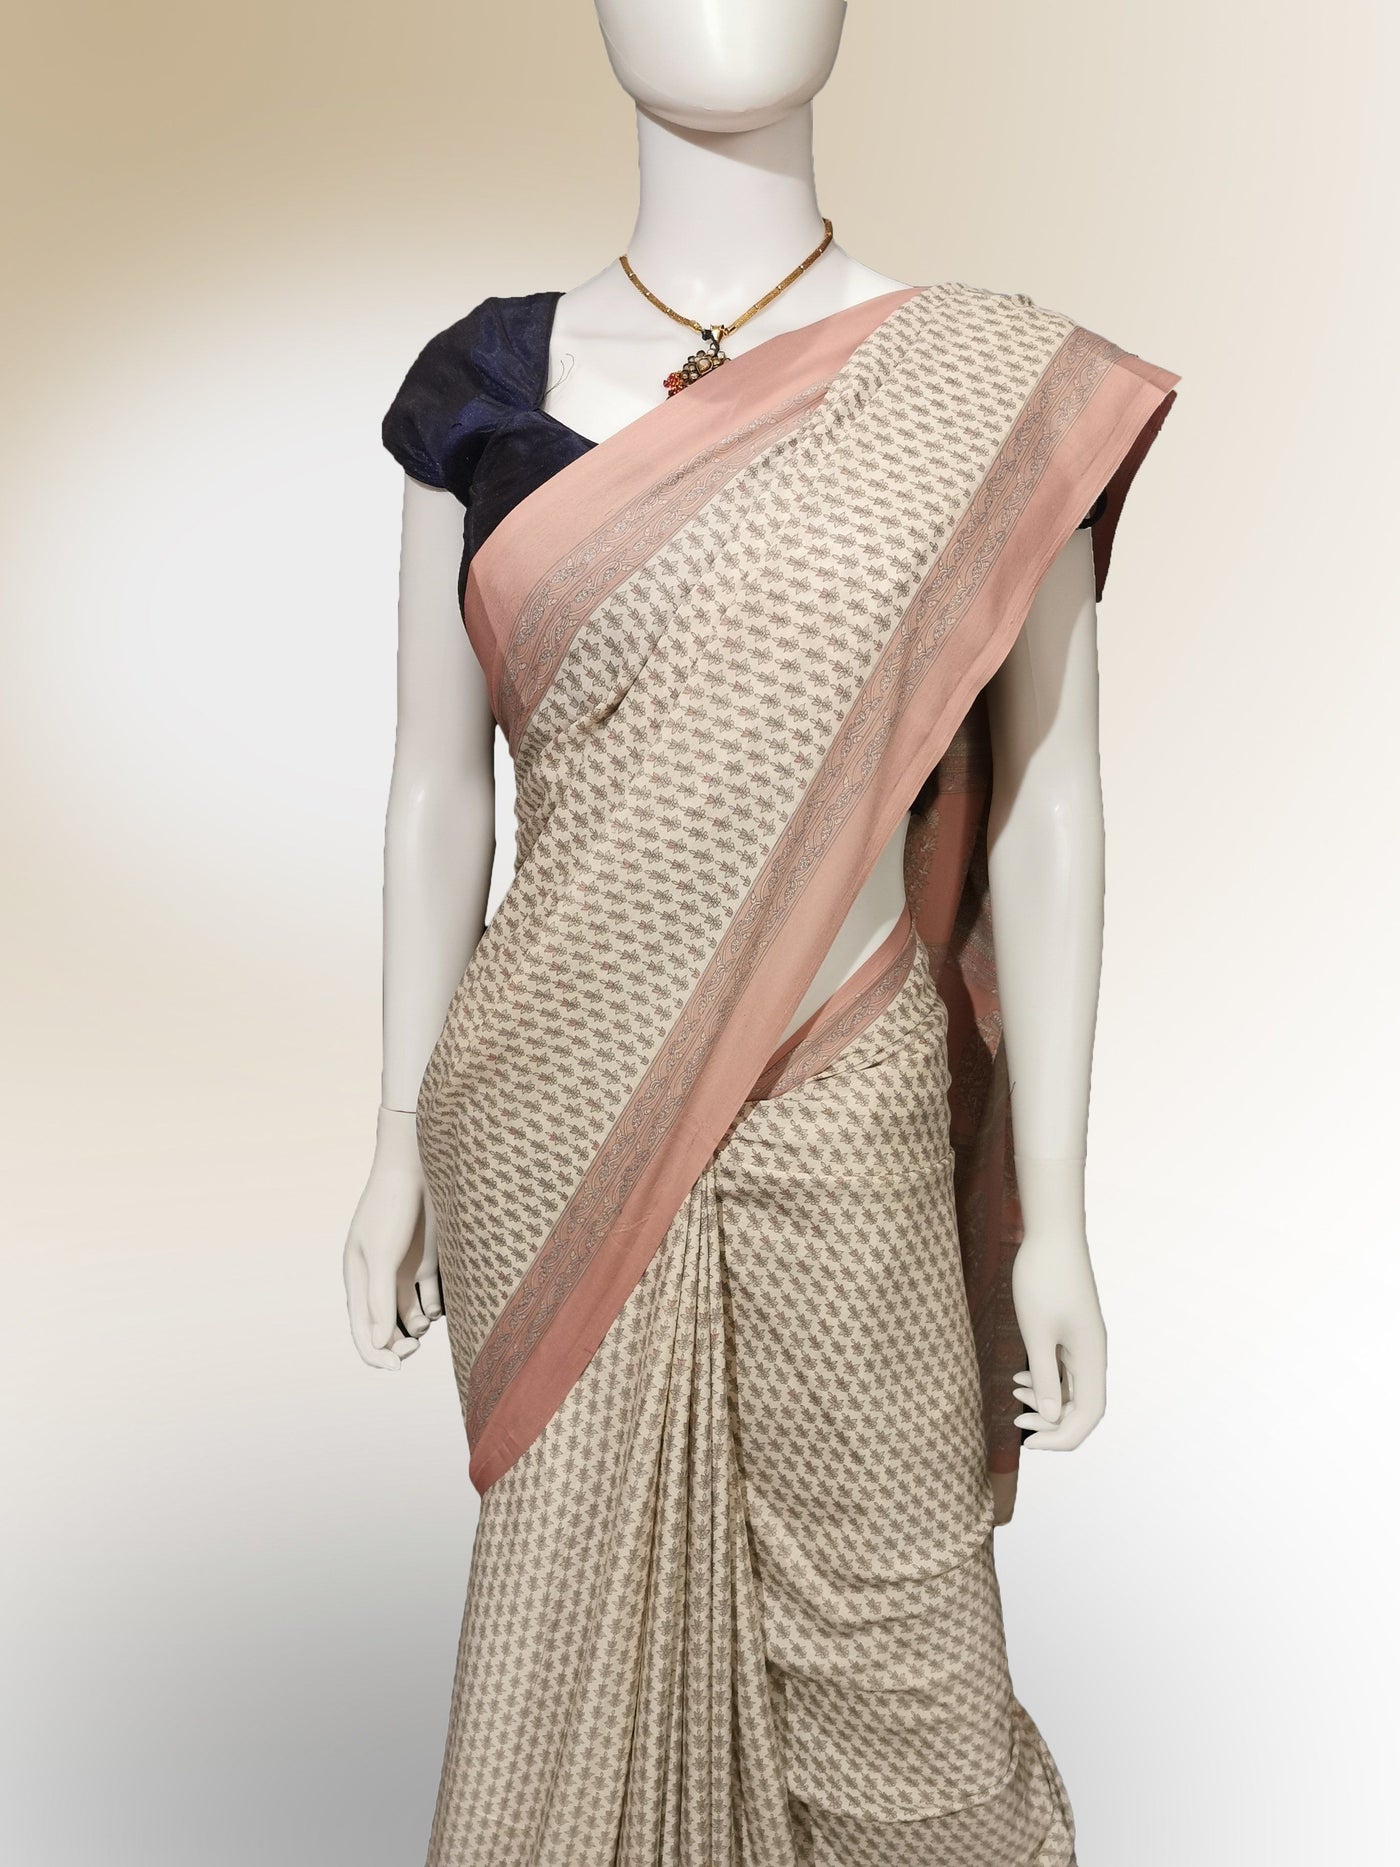 Saree in Salmon Pink with Traditional Print - Indian Clothing in Denver, CO, Aurora, CO, Boulder, CO, Fort Collins, CO, Colorado Springs, CO, Parker, CO, Highlands Ranch, CO, Cherry Creek, CO, Centennial, CO, and Longmont, CO. Nationwide shipping USA - India Fashion X